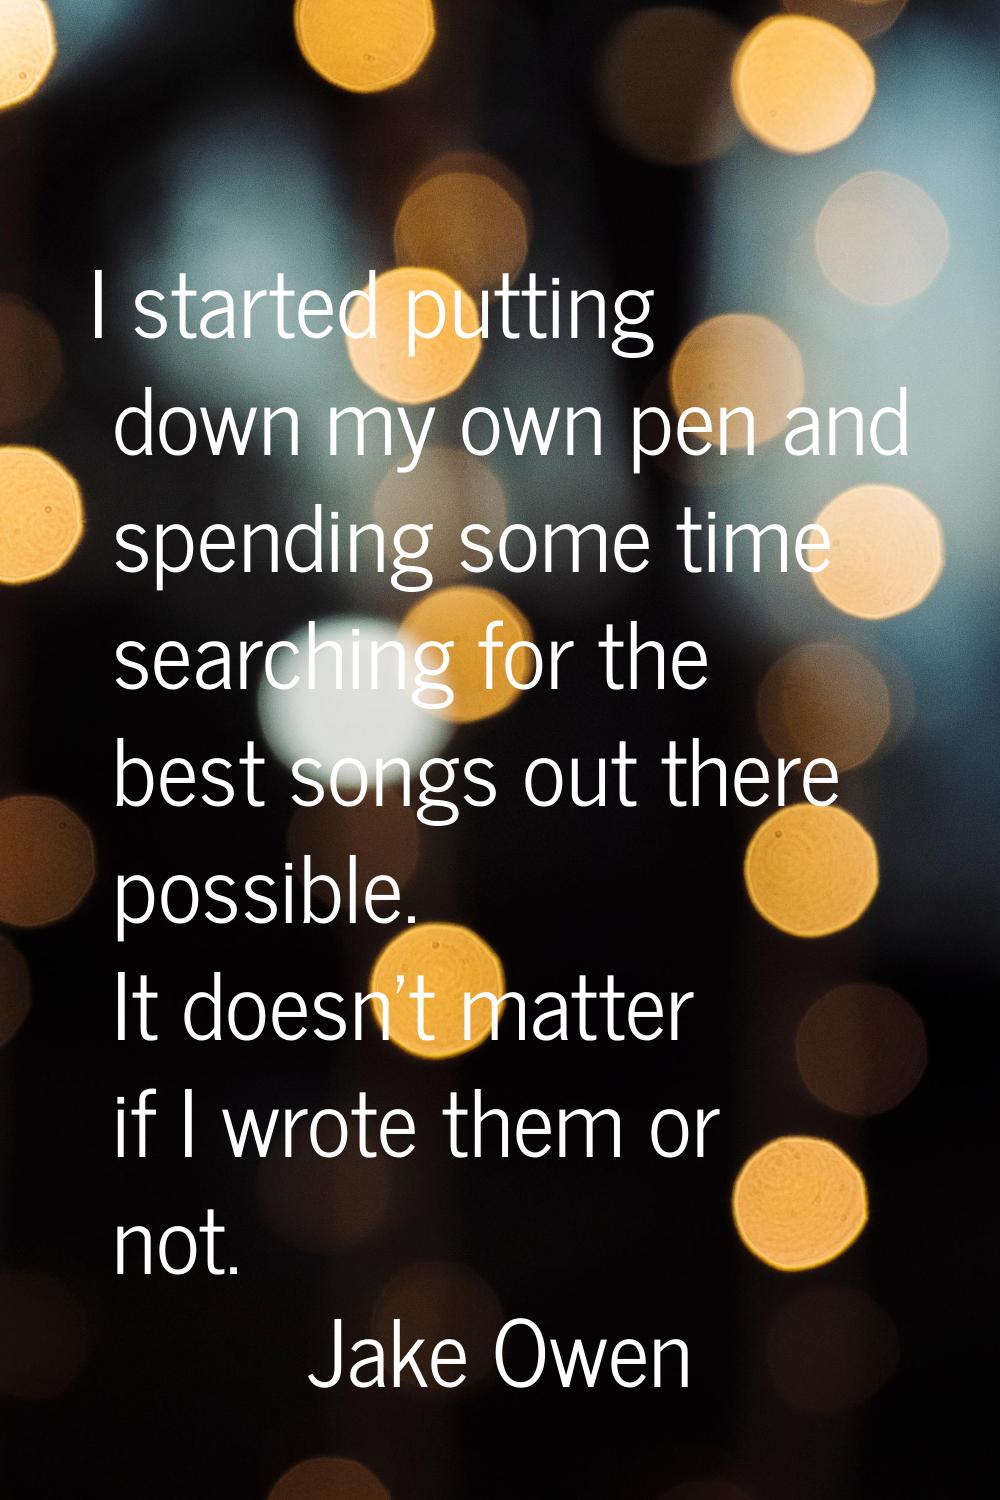 I started putting down my own pen and spending some time searching for the best songs out there pos